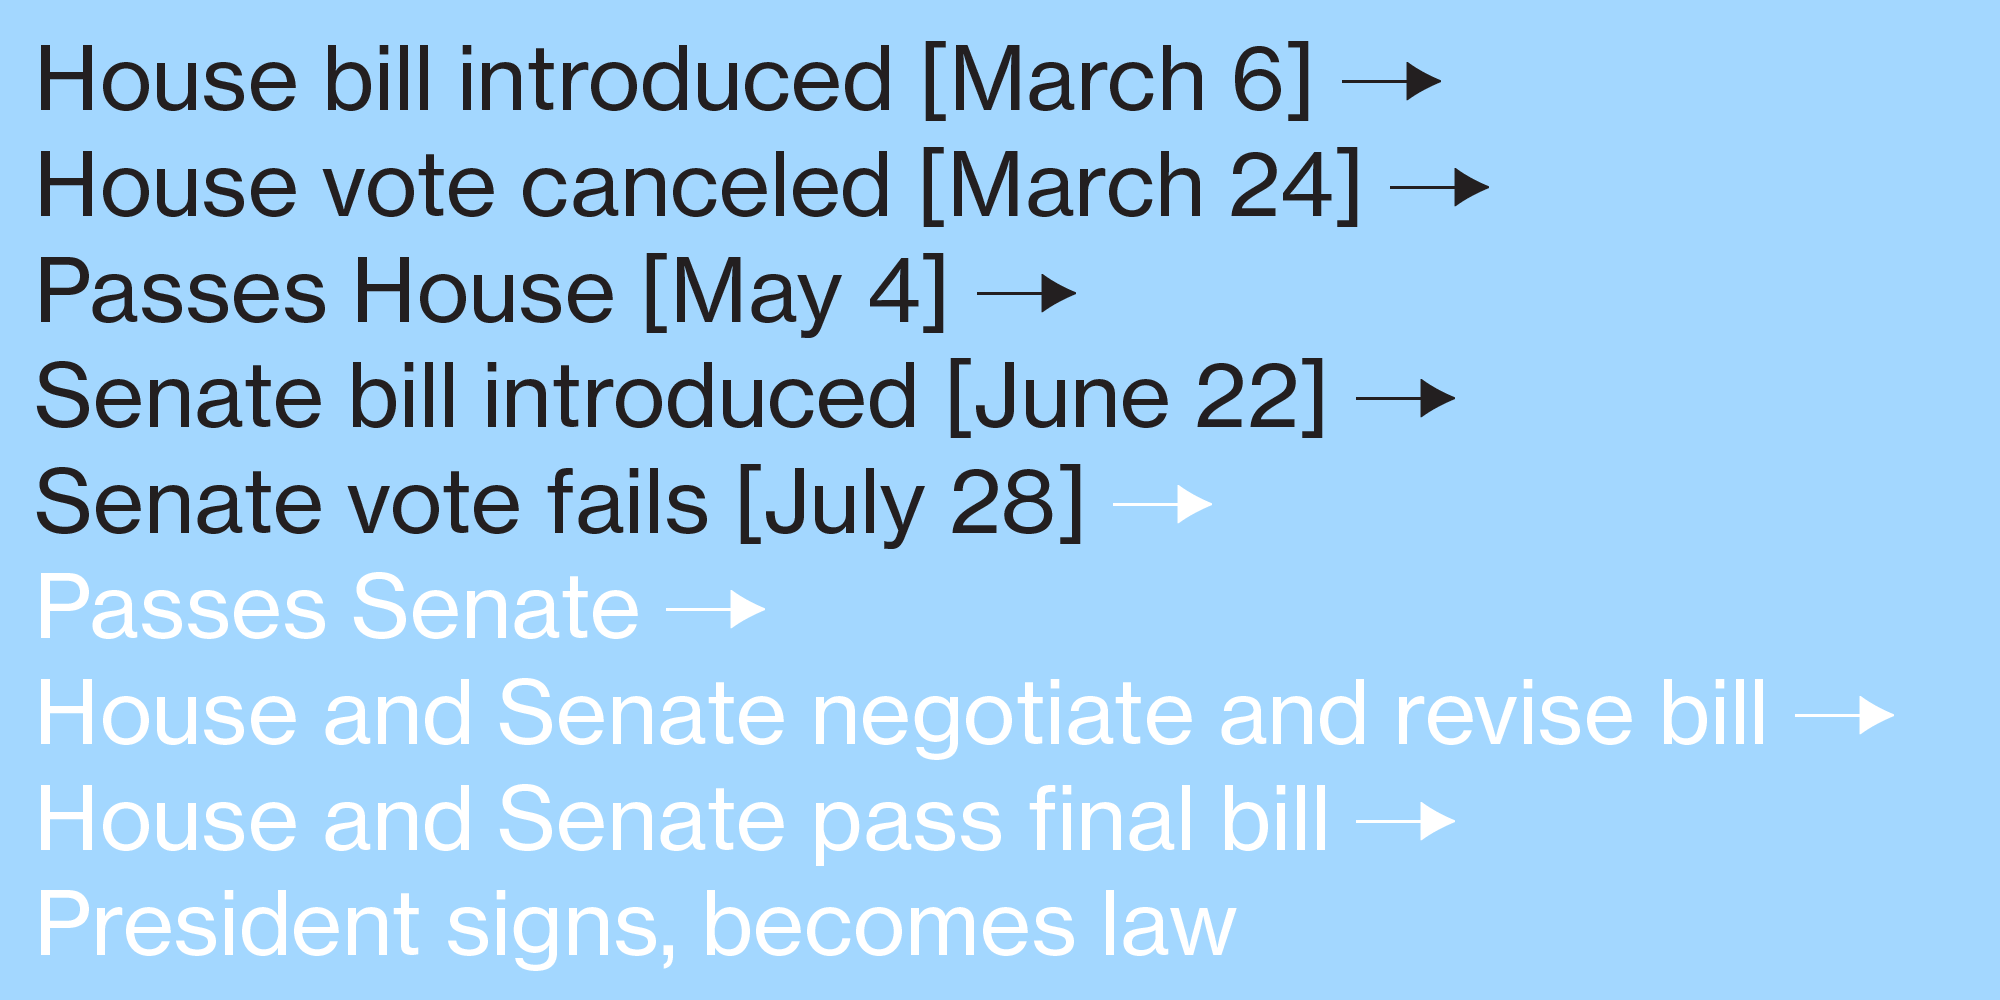 Text on light blue background listing key events in 2017 attempted Affordable Care Act repeal